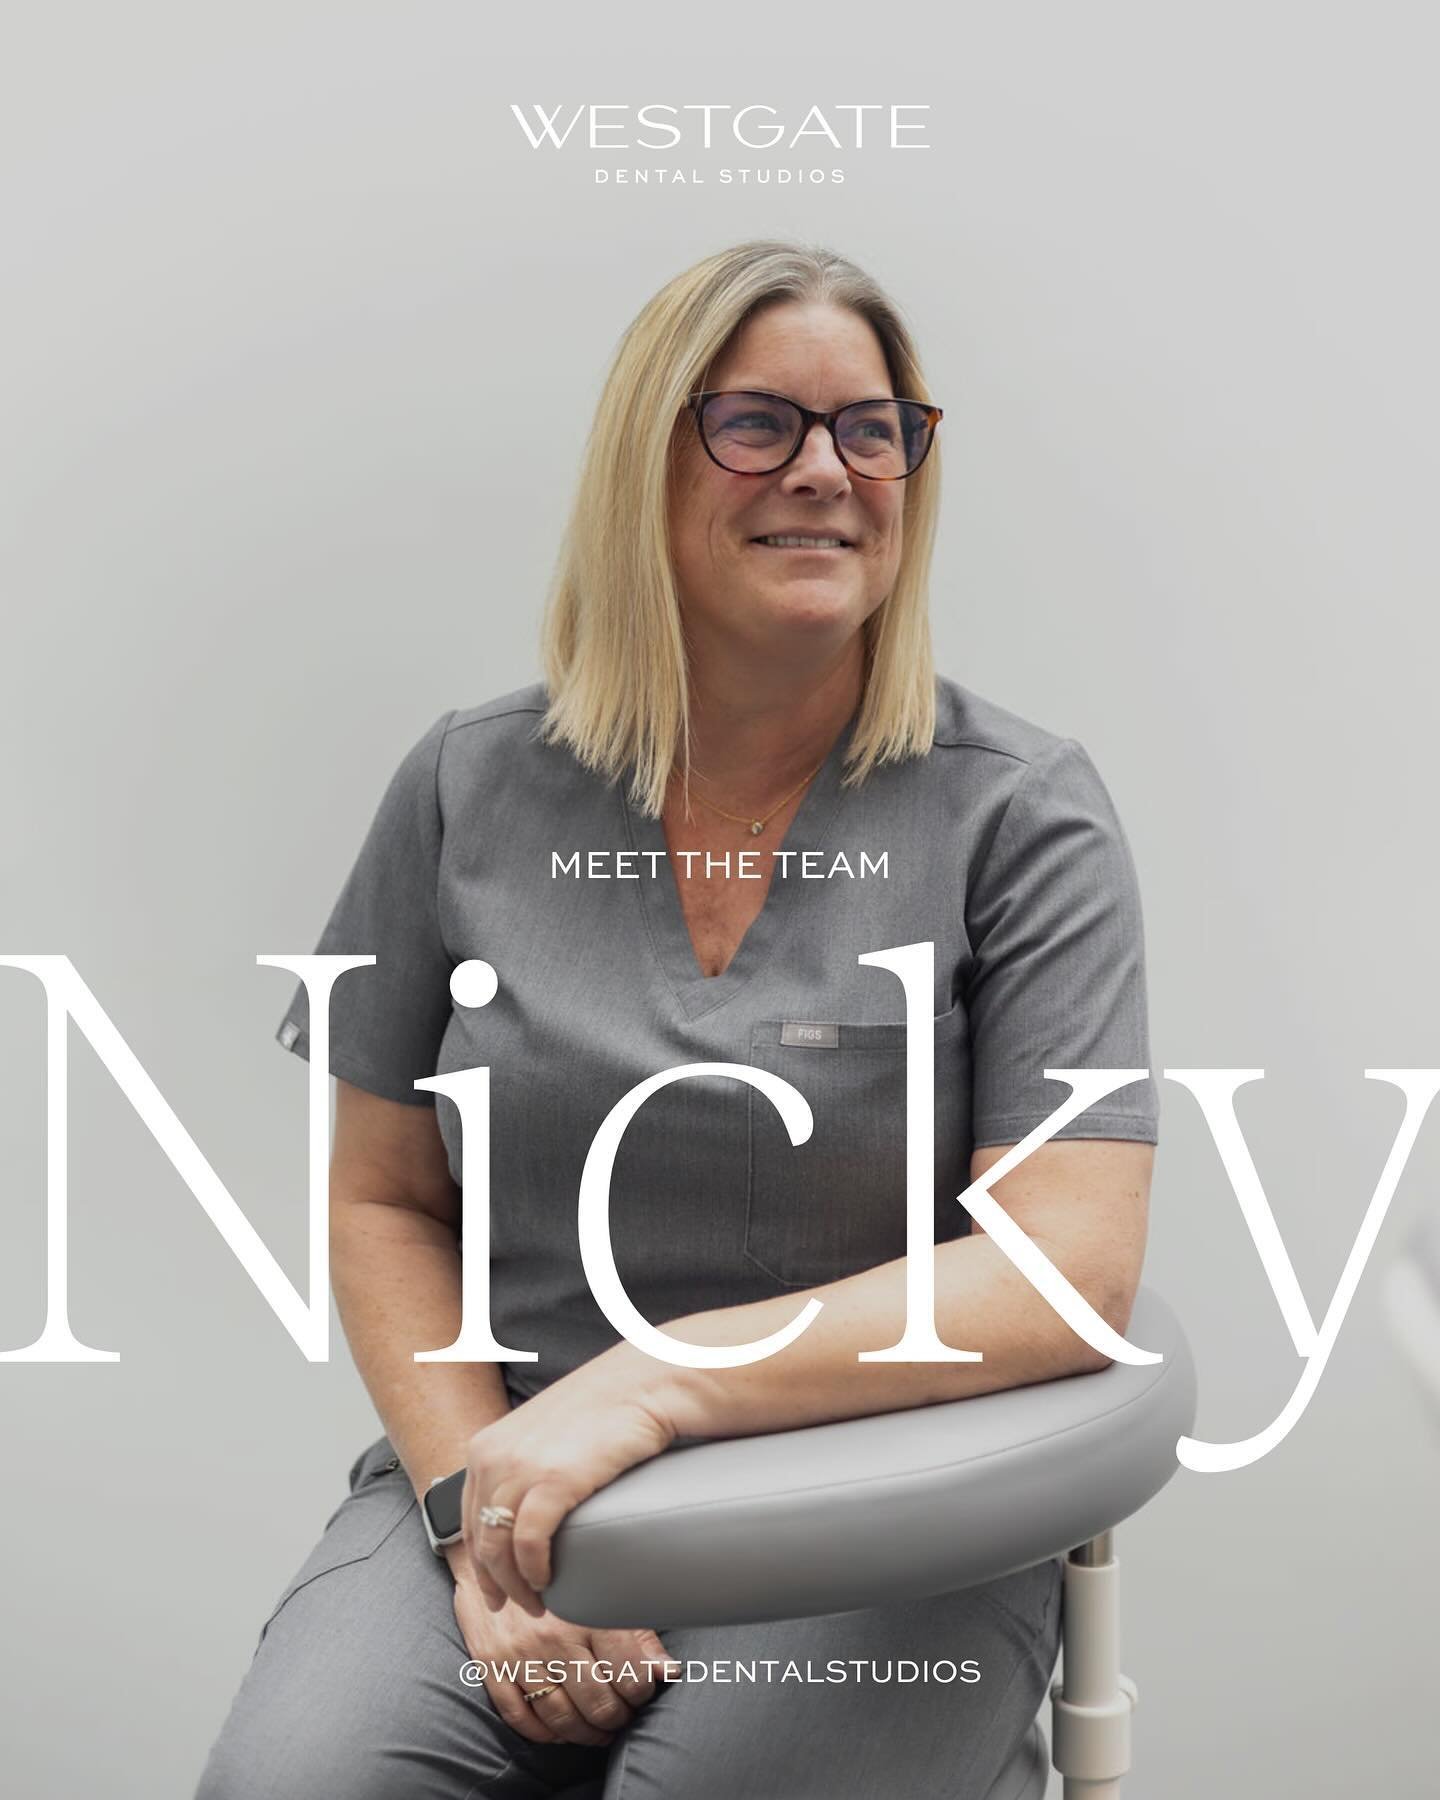 Meet Nicky, a seasoned professional in dentistry with a career spanning over three decades. Her journey began in 1992, where she started as a receptionist and quickly transitioned into a dental nurse. Over the years, Nicky&rsquo;s passion for dentist